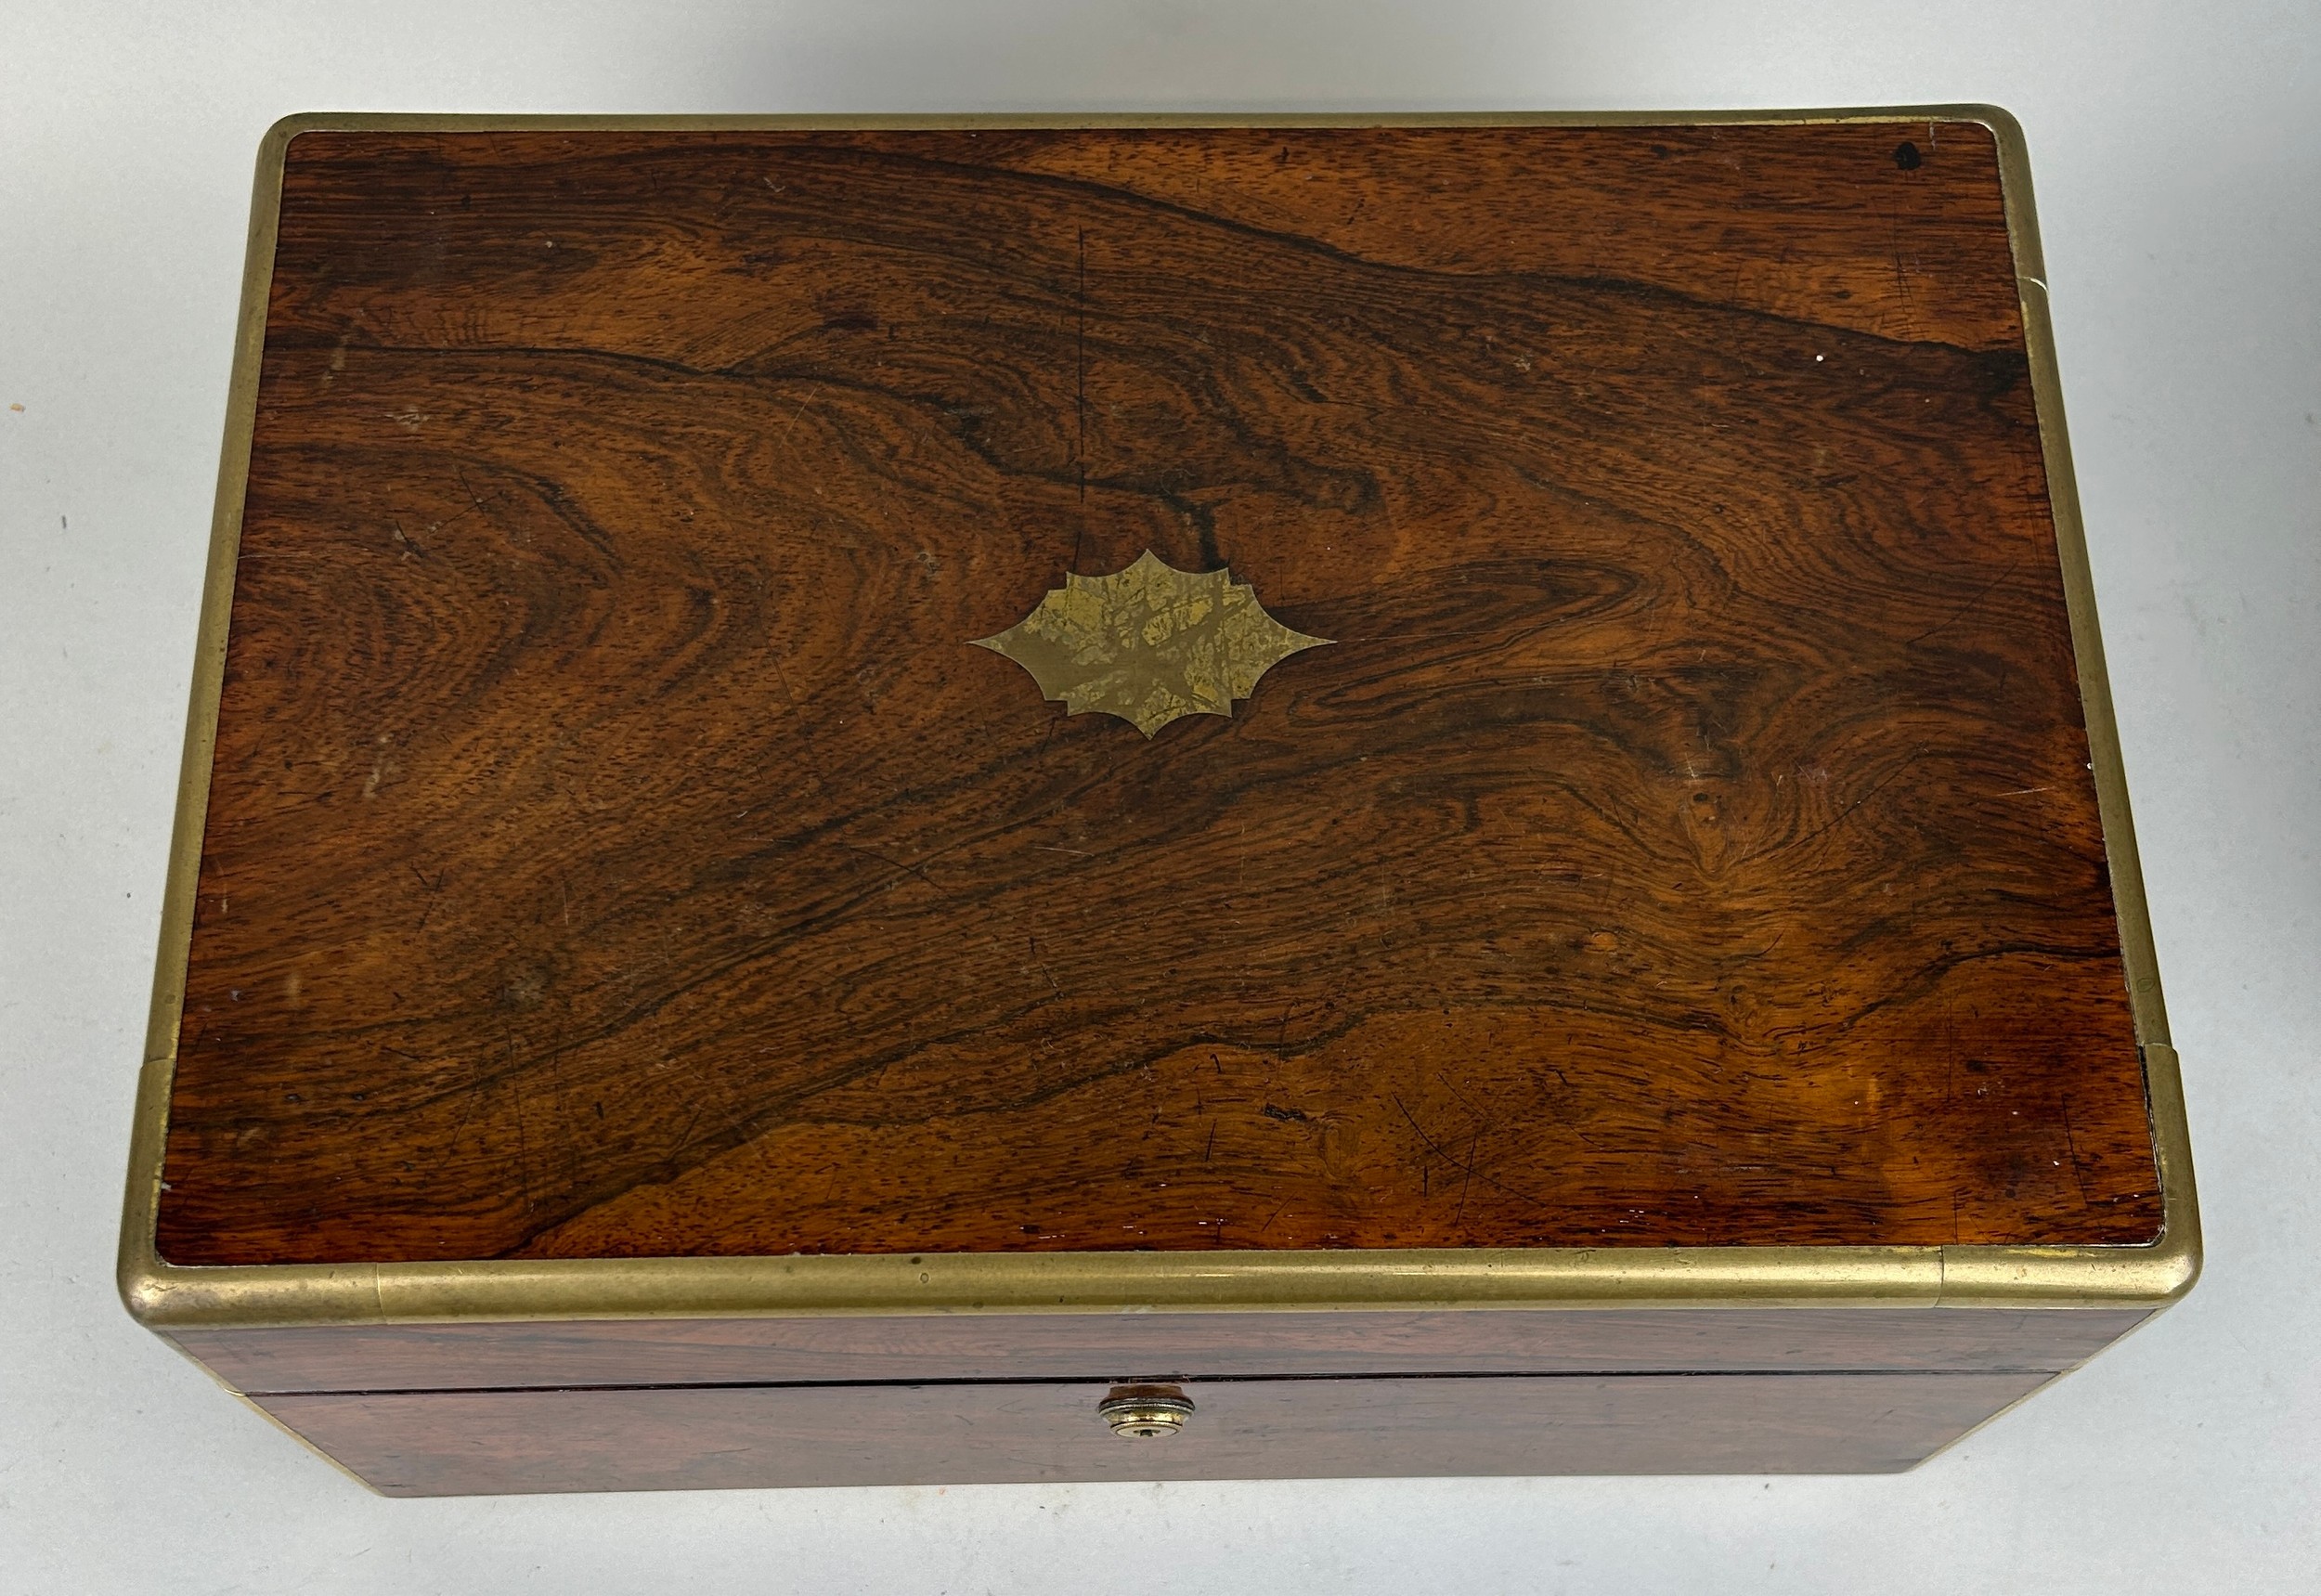 A 19TH CENTURY SILVER VANITY SET IN A CAMPAIGN BOX WITH BRASS HANDLES, 35cm x 25cm x 15cm - Image 3 of 4